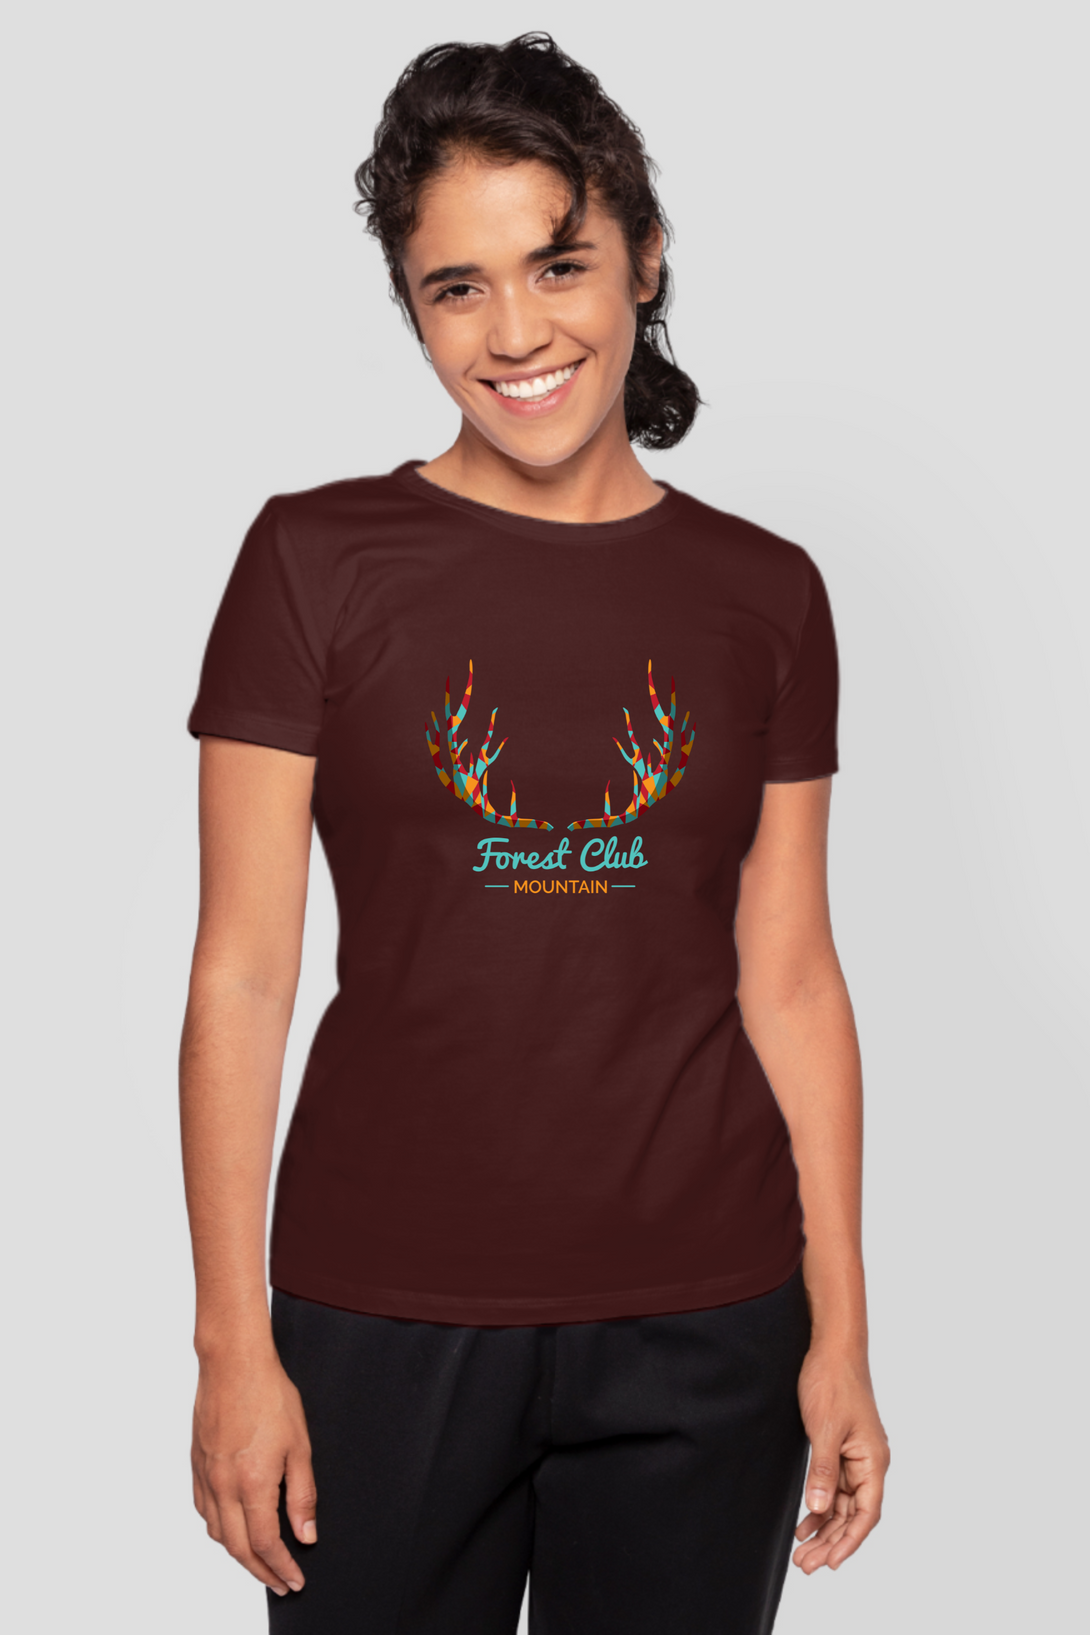 Forest Club Printed T-Shirt For Women - WowWaves - 10